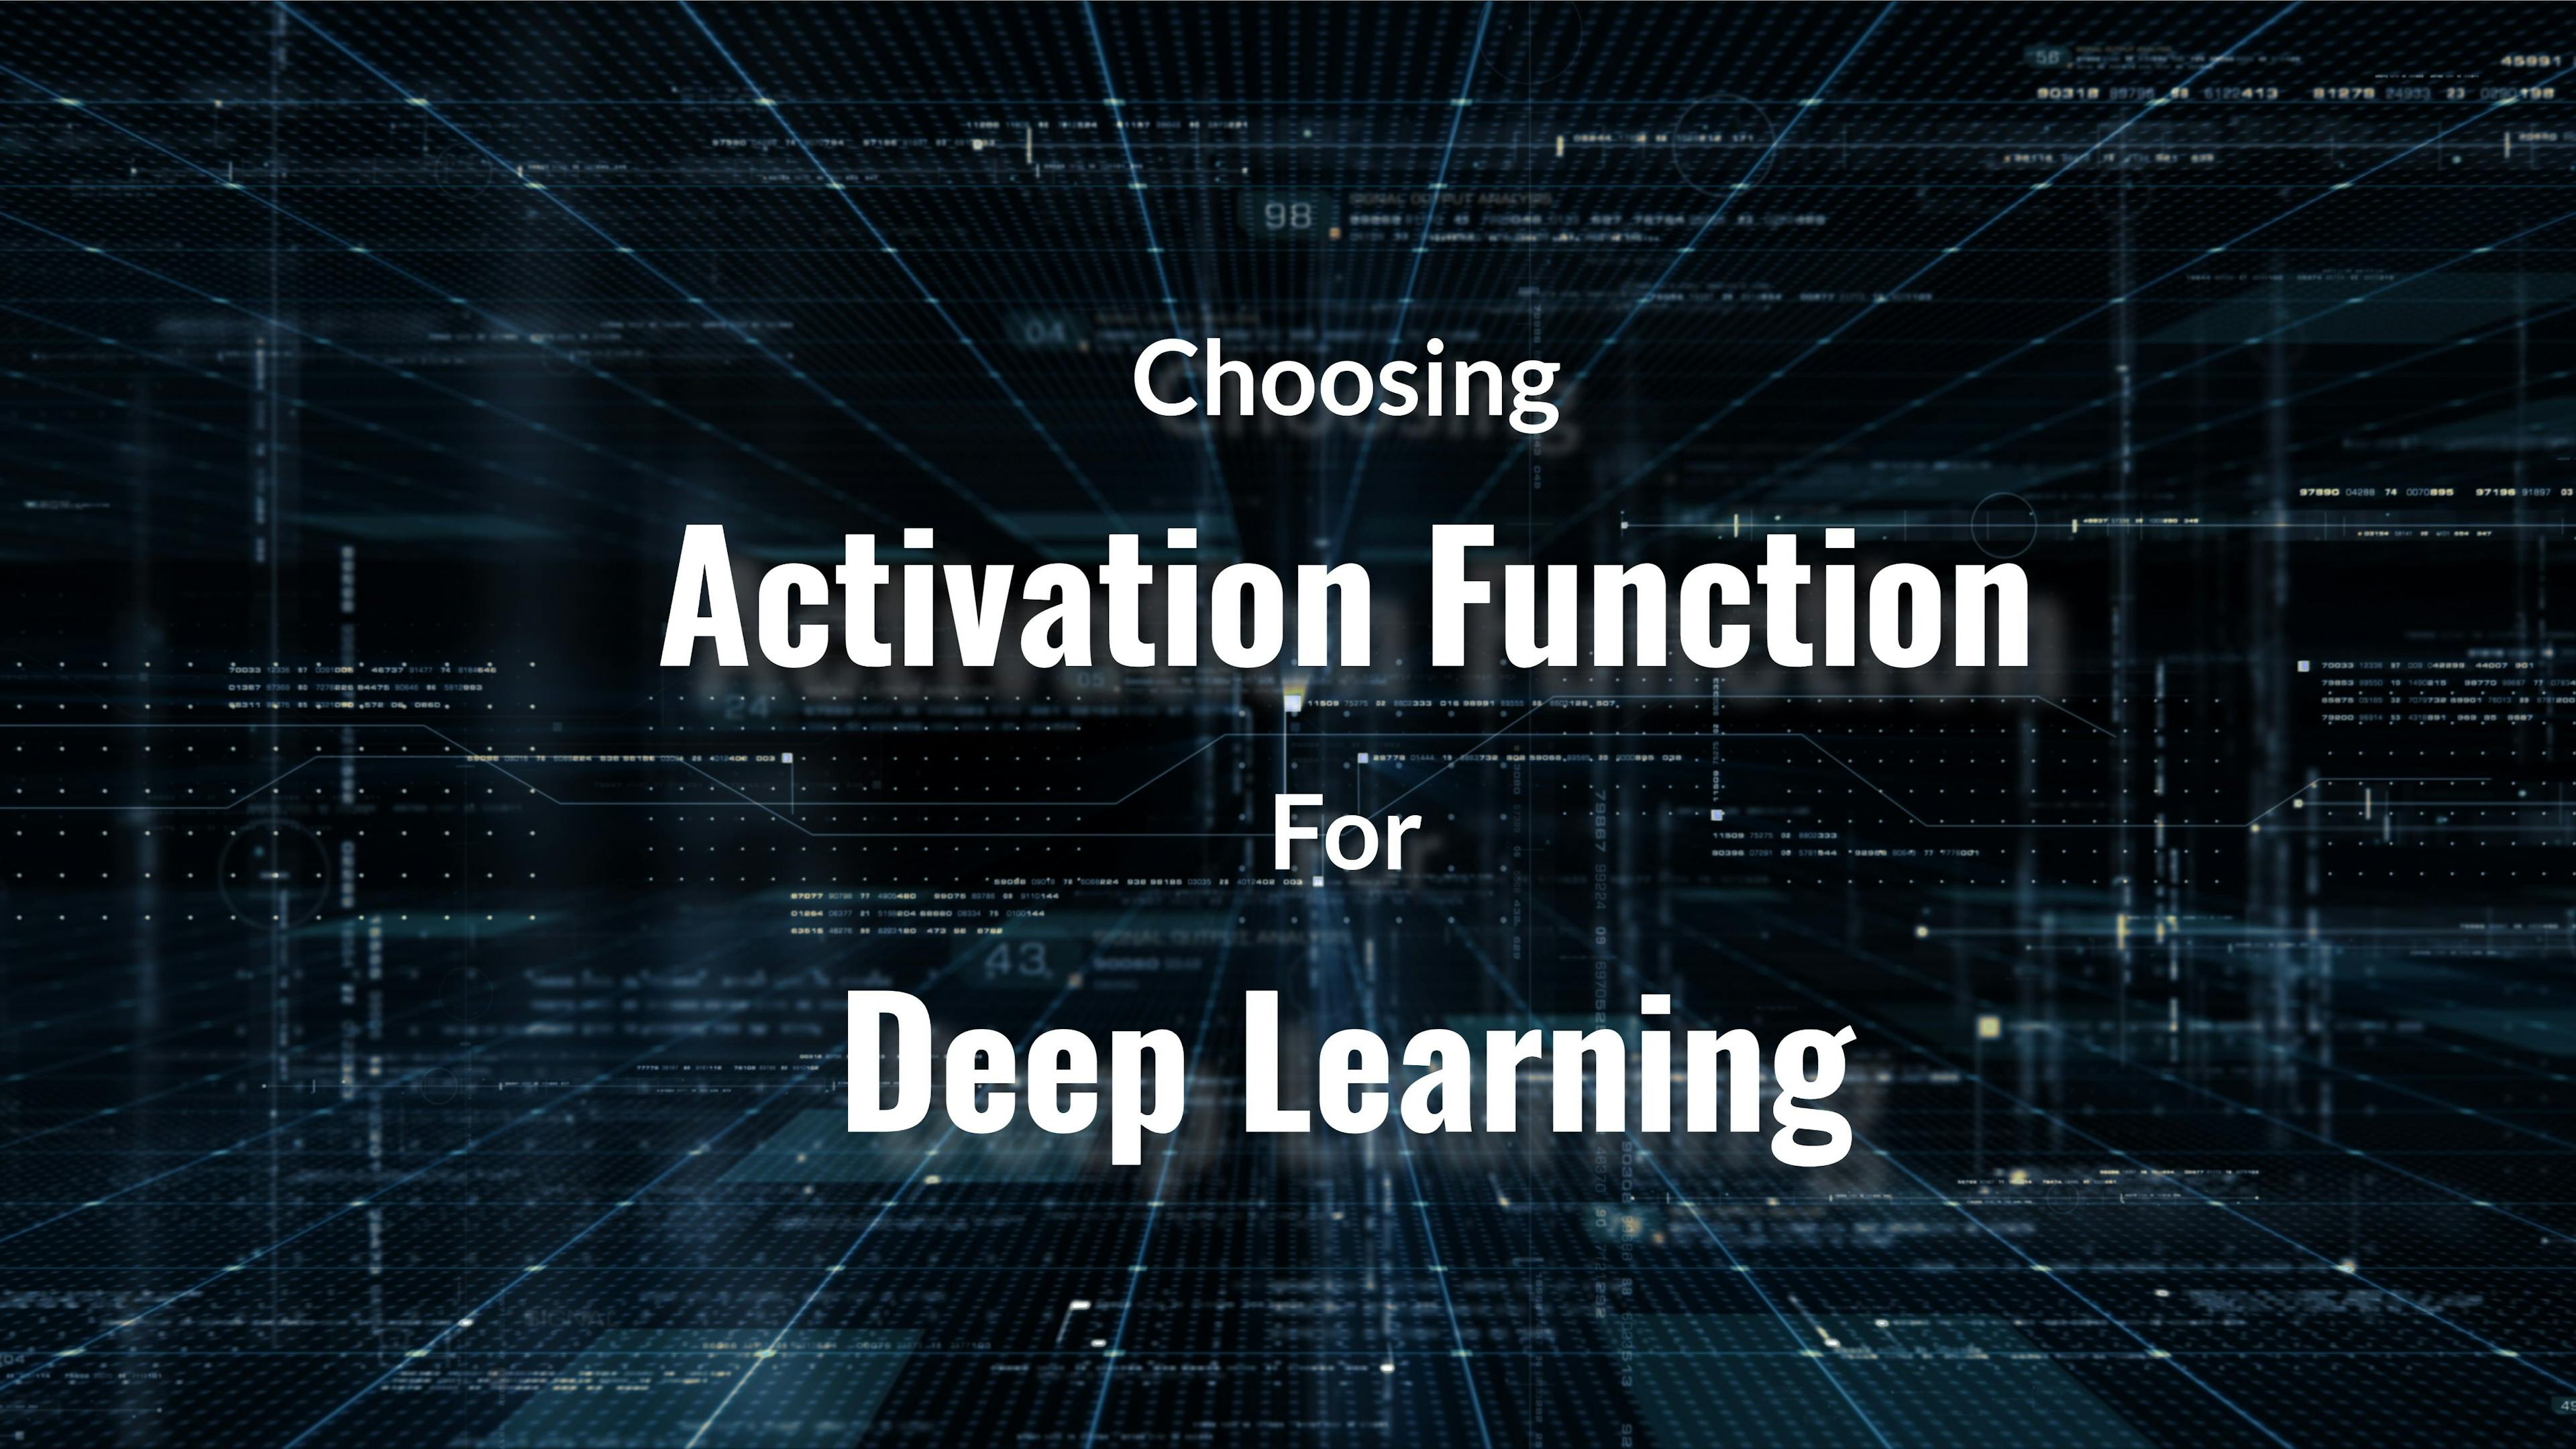 How to choose an activation function for Deep Learning.